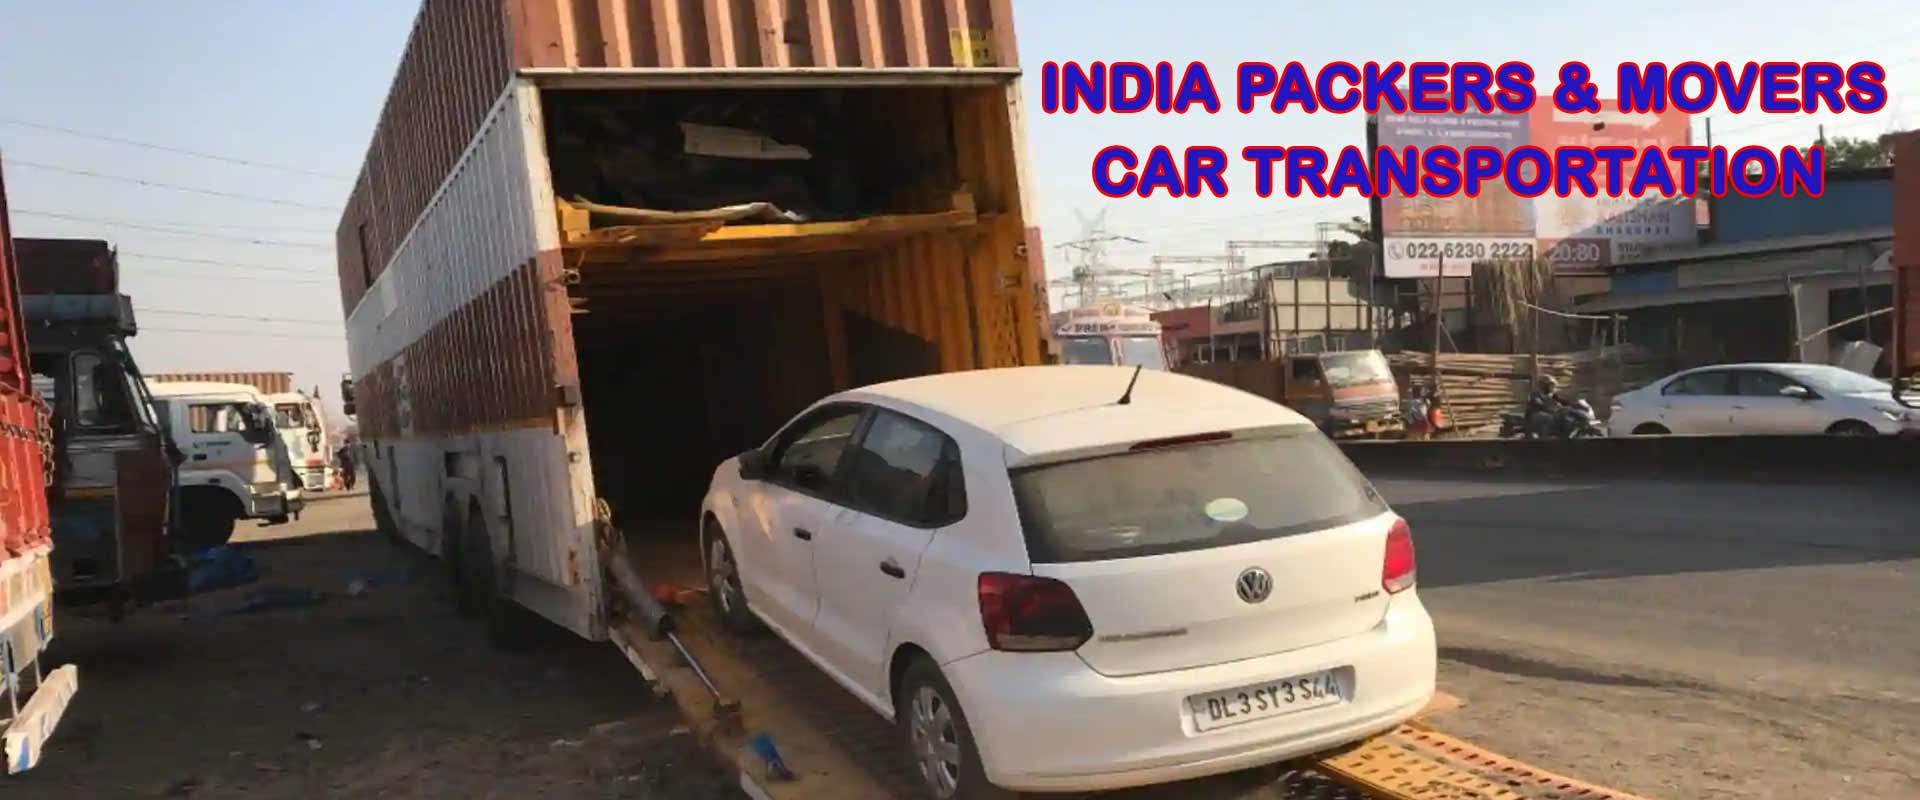 India Packers and Movers Car Transportation